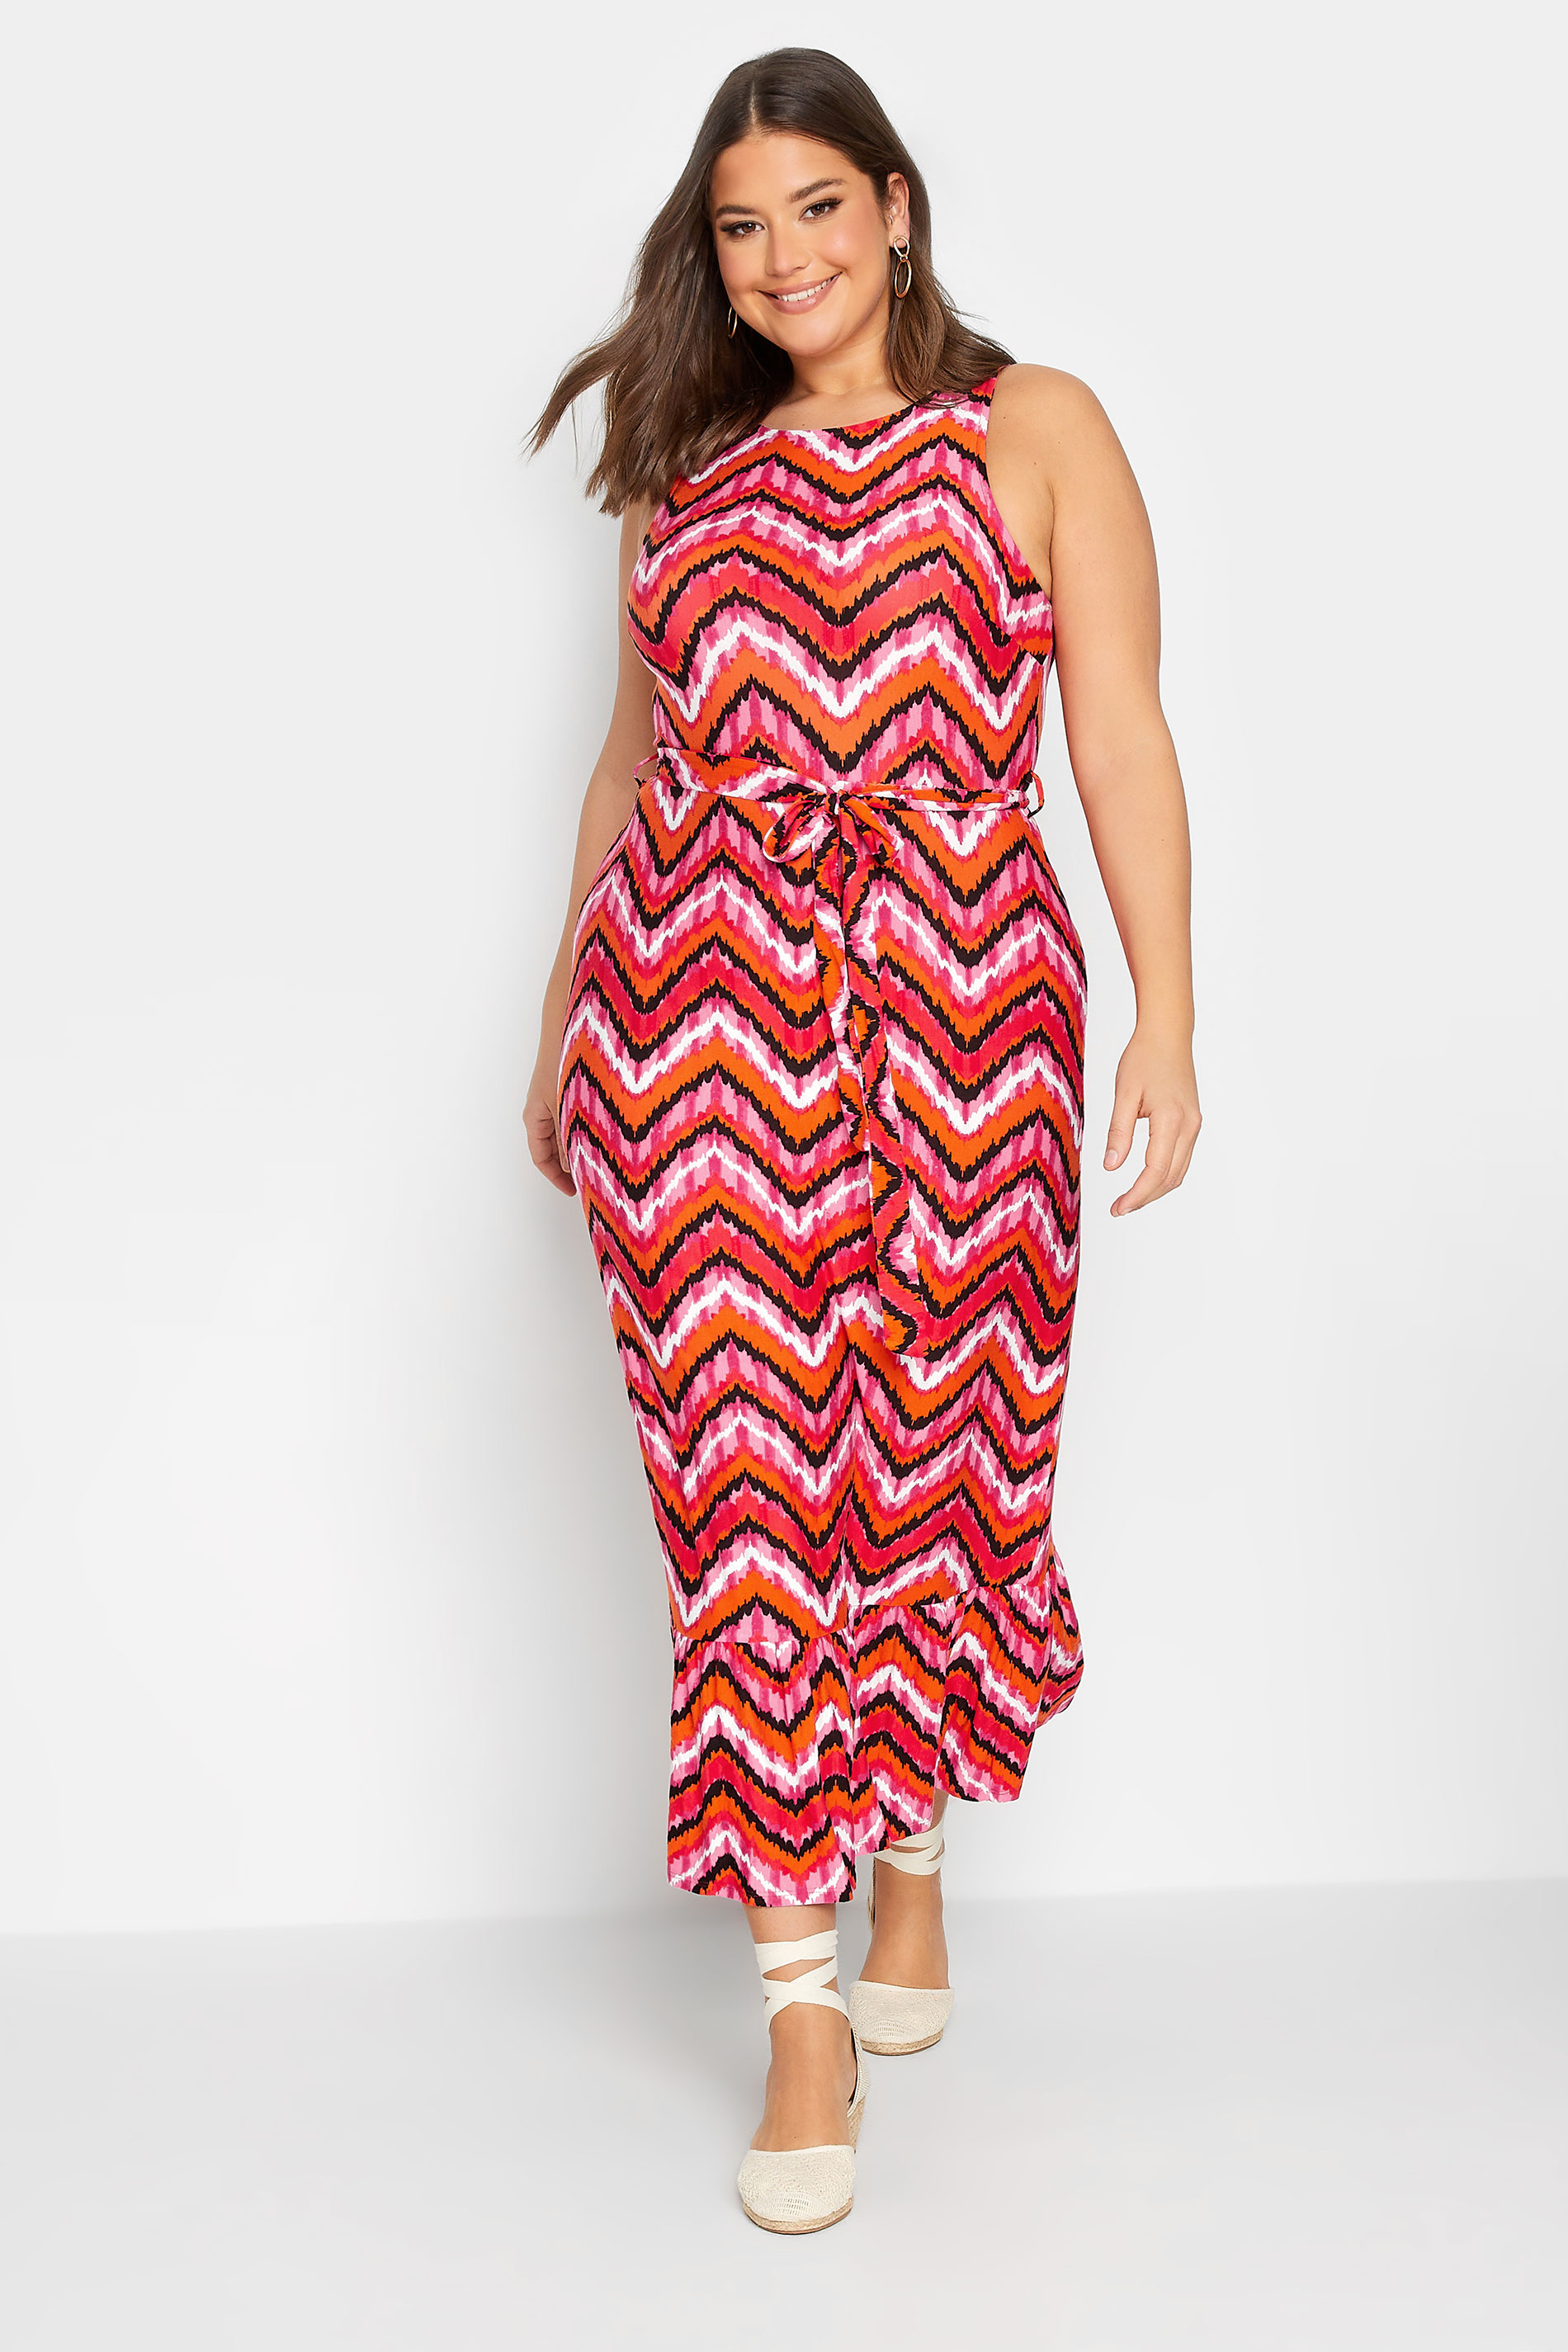 YOURS LONDON Plus Size Orange Geometric Print Tiered Maxi Dress | Yours Clothing 2